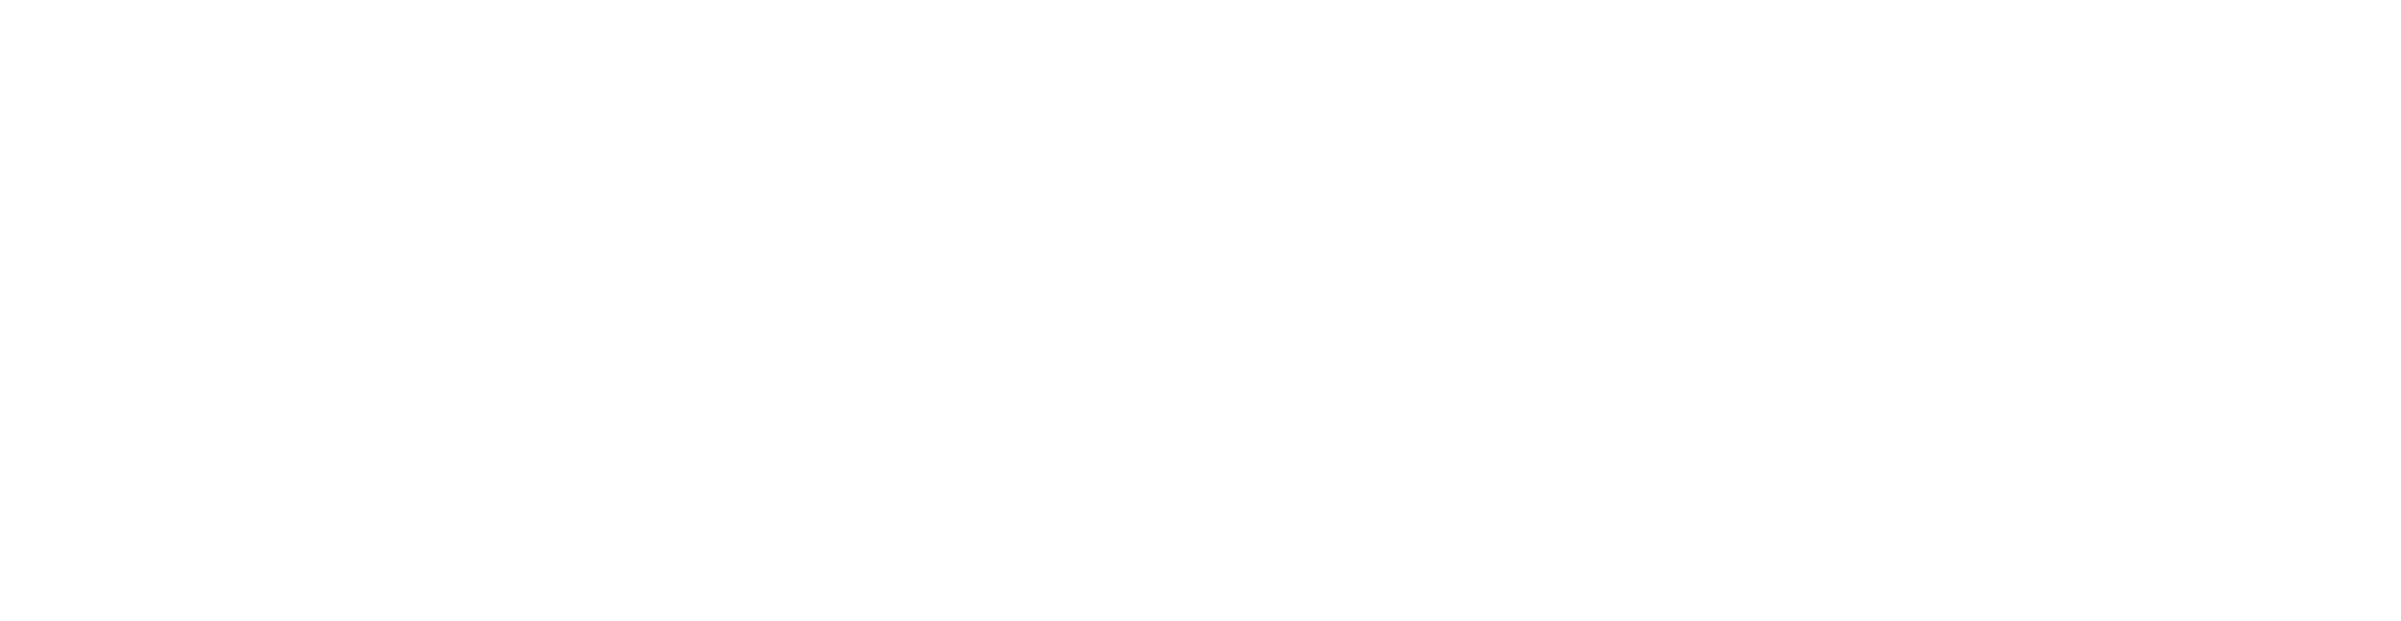 exEXPERTS